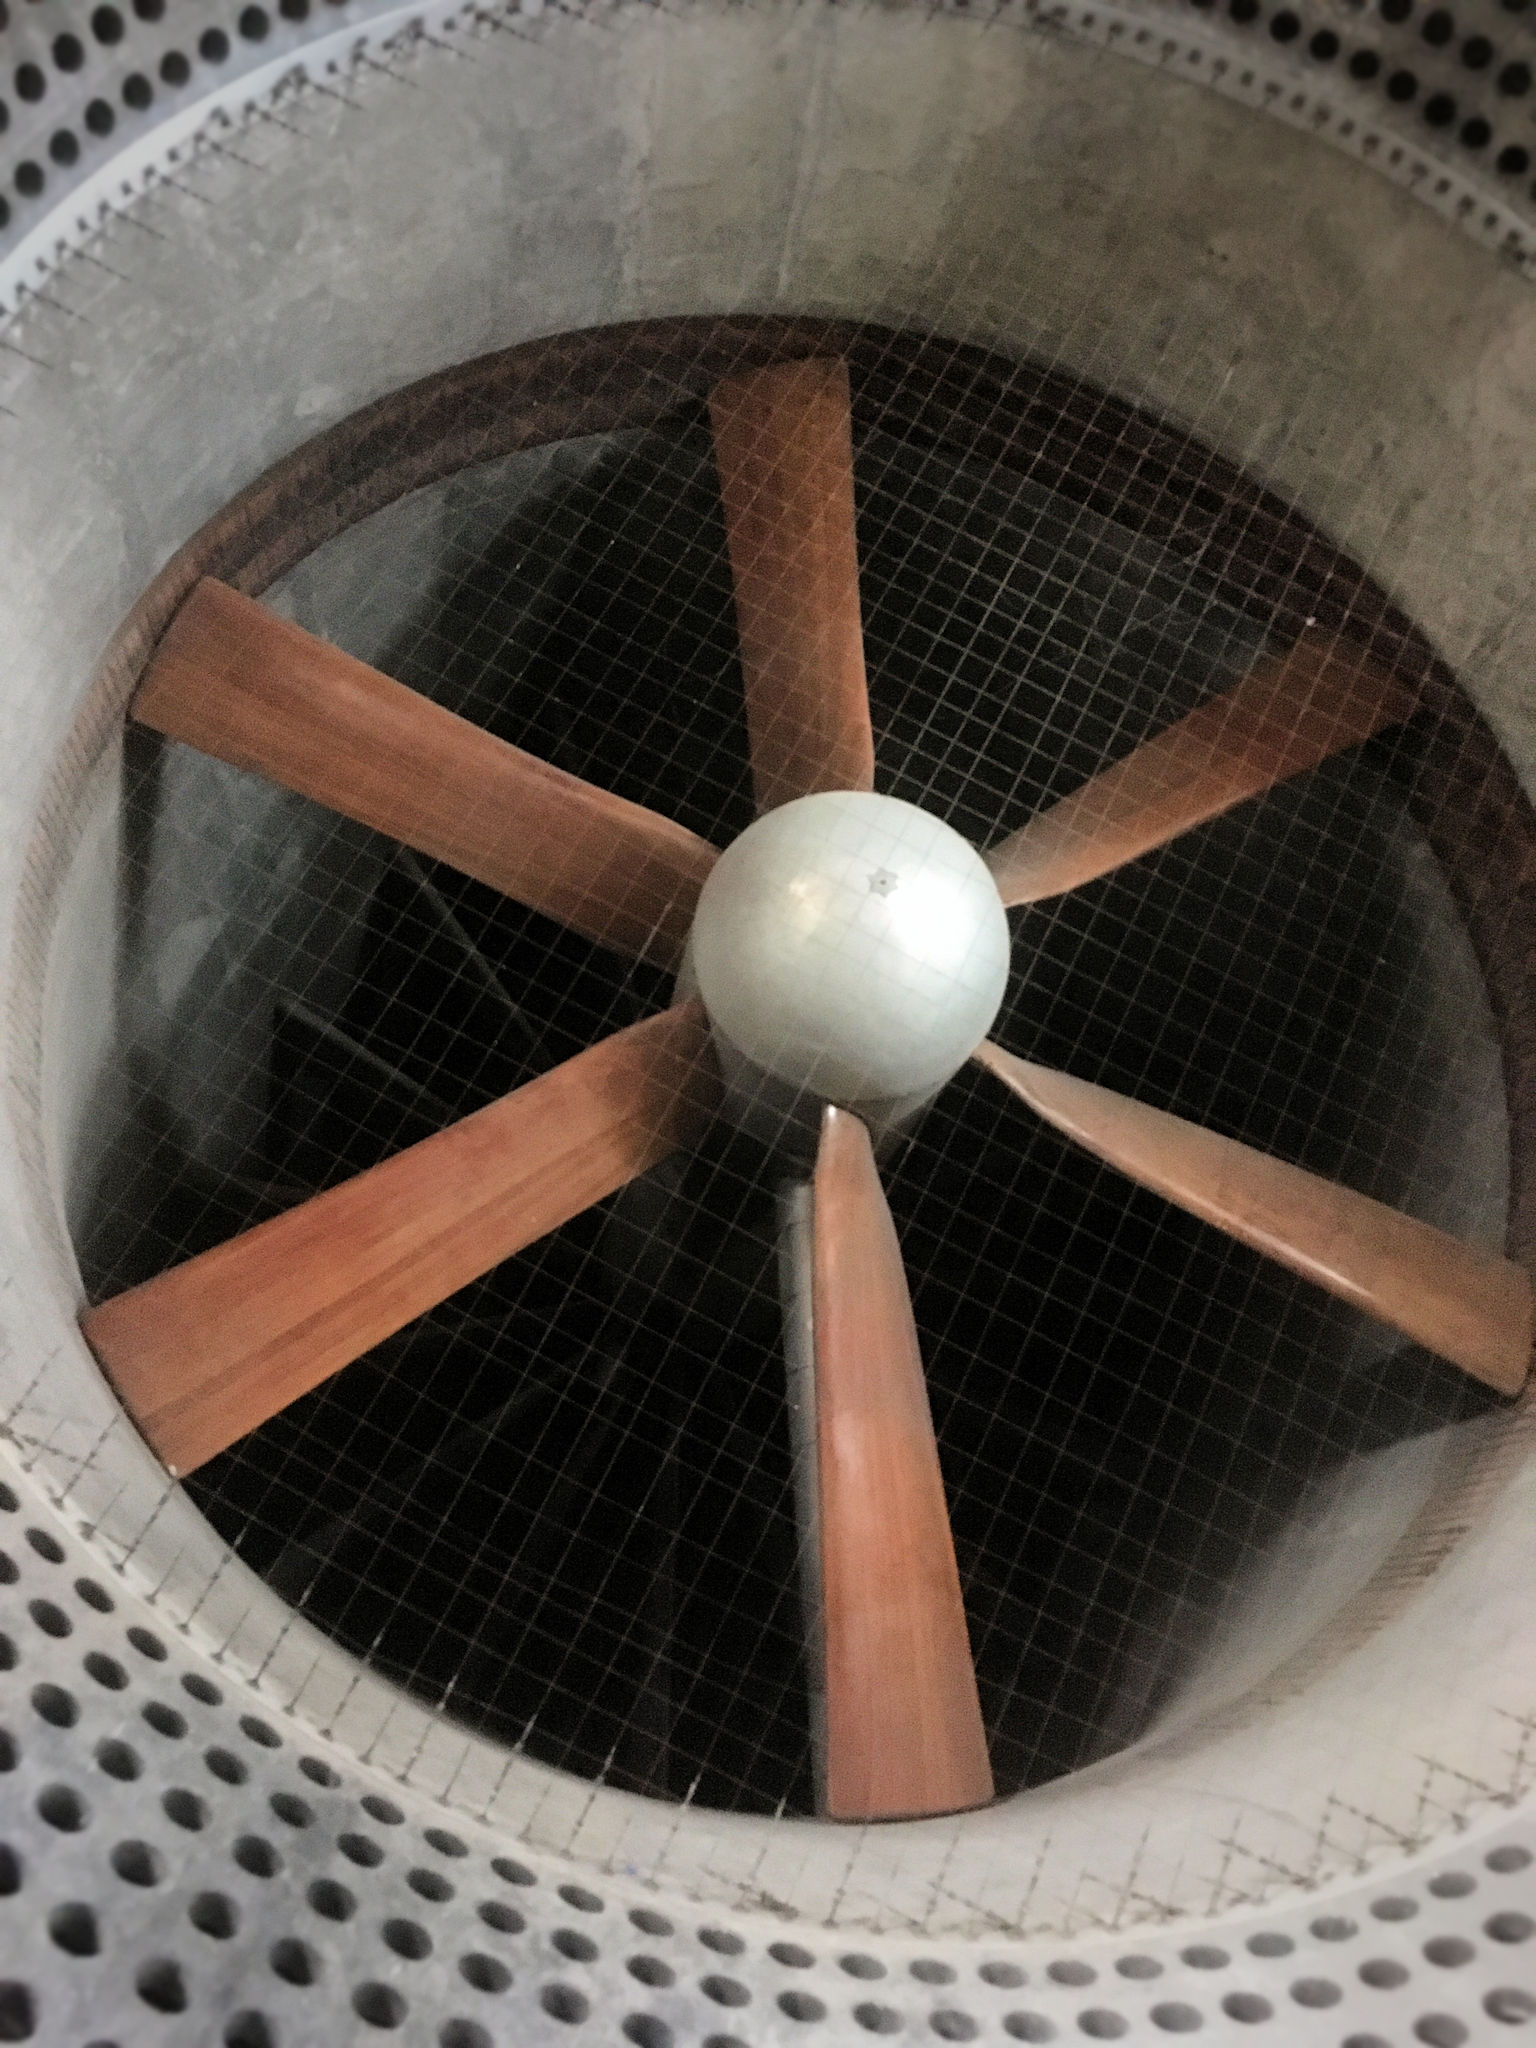 A very large mahogany bladed fan in a concrete surround